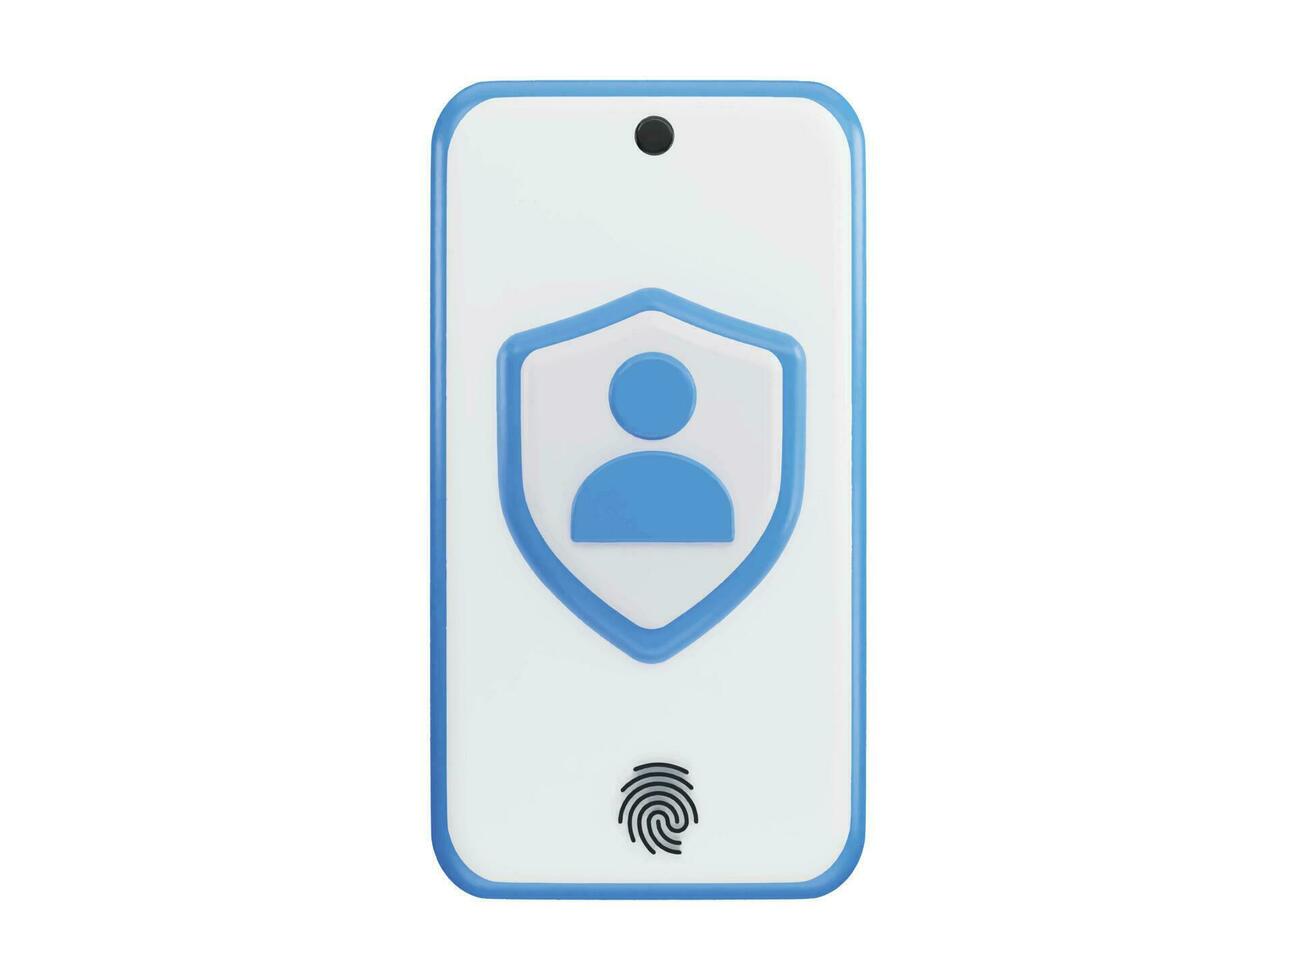 User on Mobile phone with protect shield 3d rendering vector icon illustration